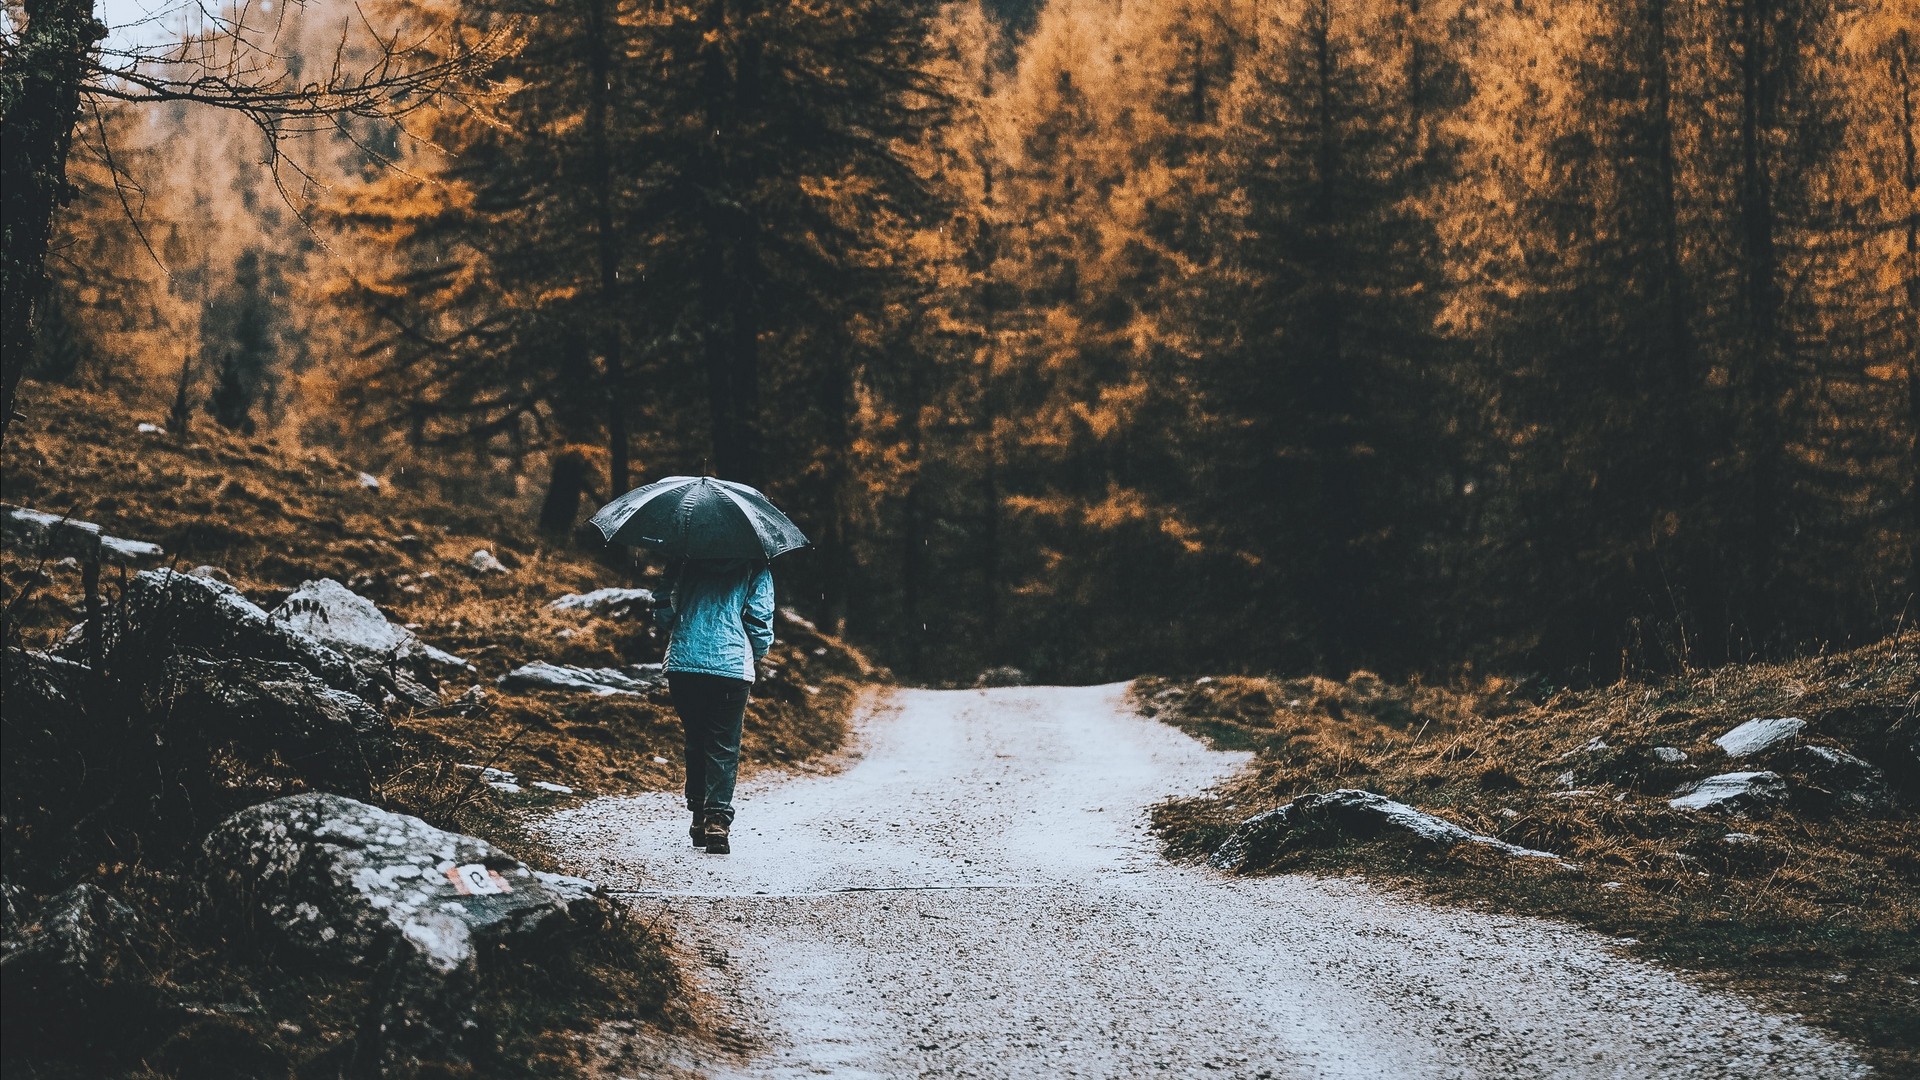 1920x1080 wallpapers: road, forest, man, umbrella (image)